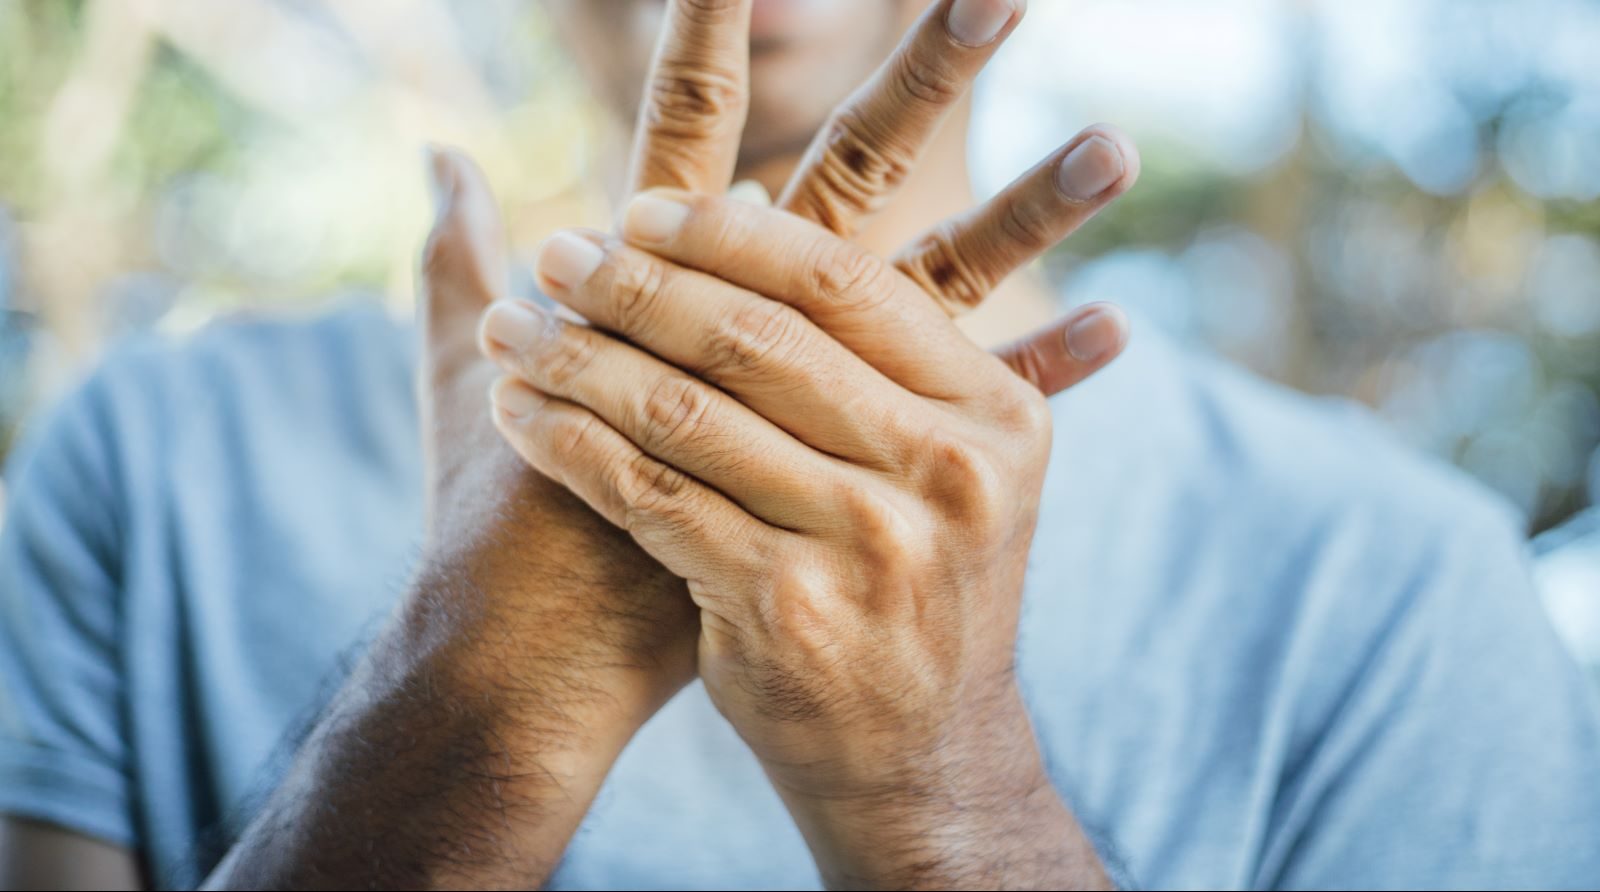 We asked David Tinklepaugh, MD, to explain some of the lesser known signs of neuropathy, and why it’s important to get a diagnosis.